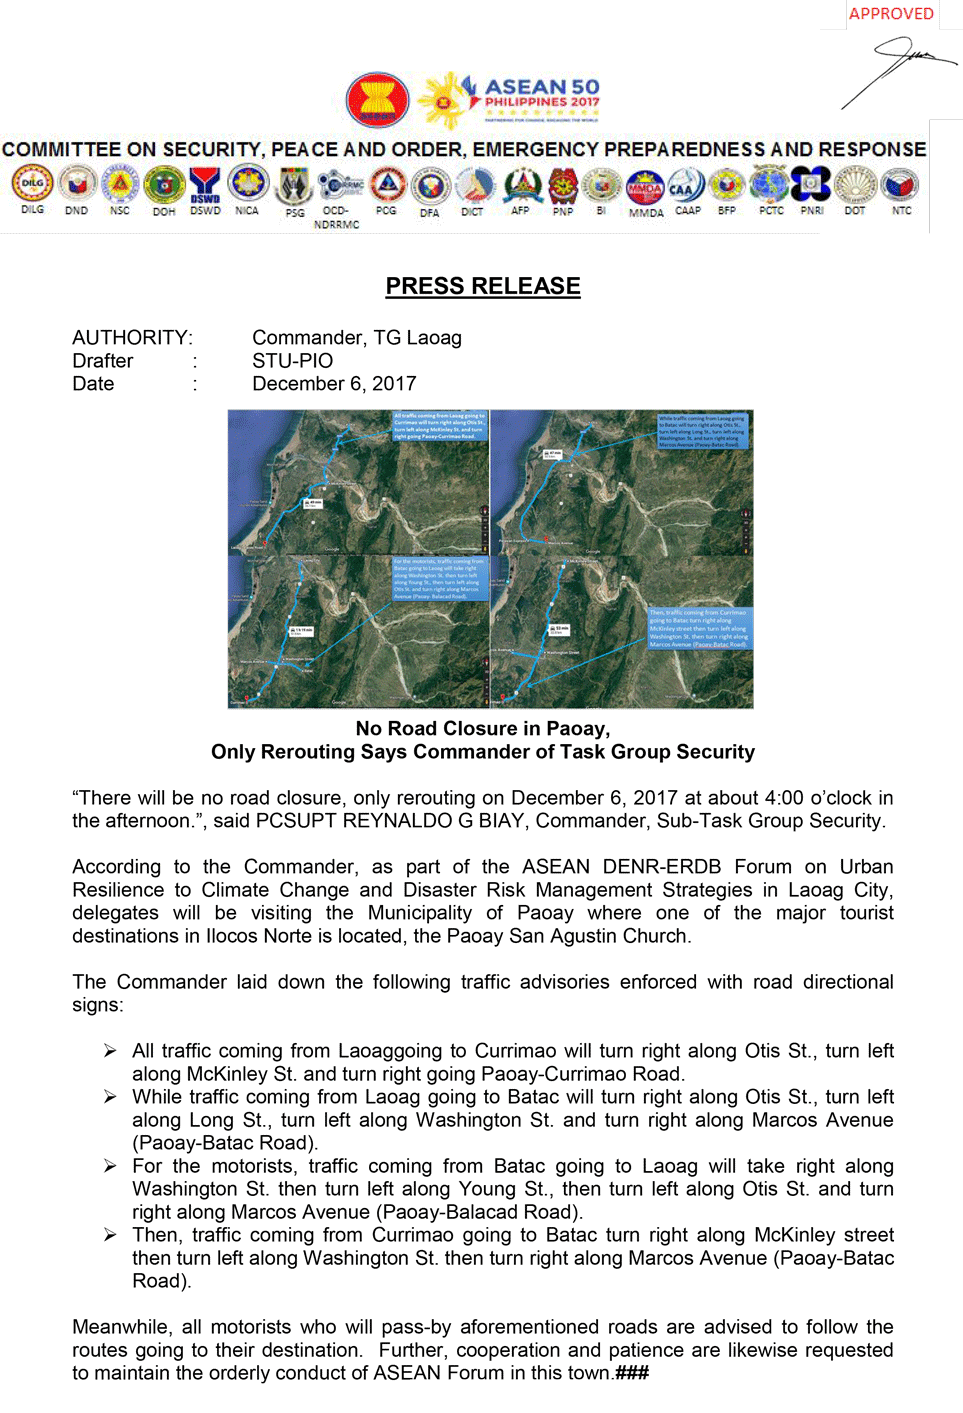 press release re no road closure in paoay 1